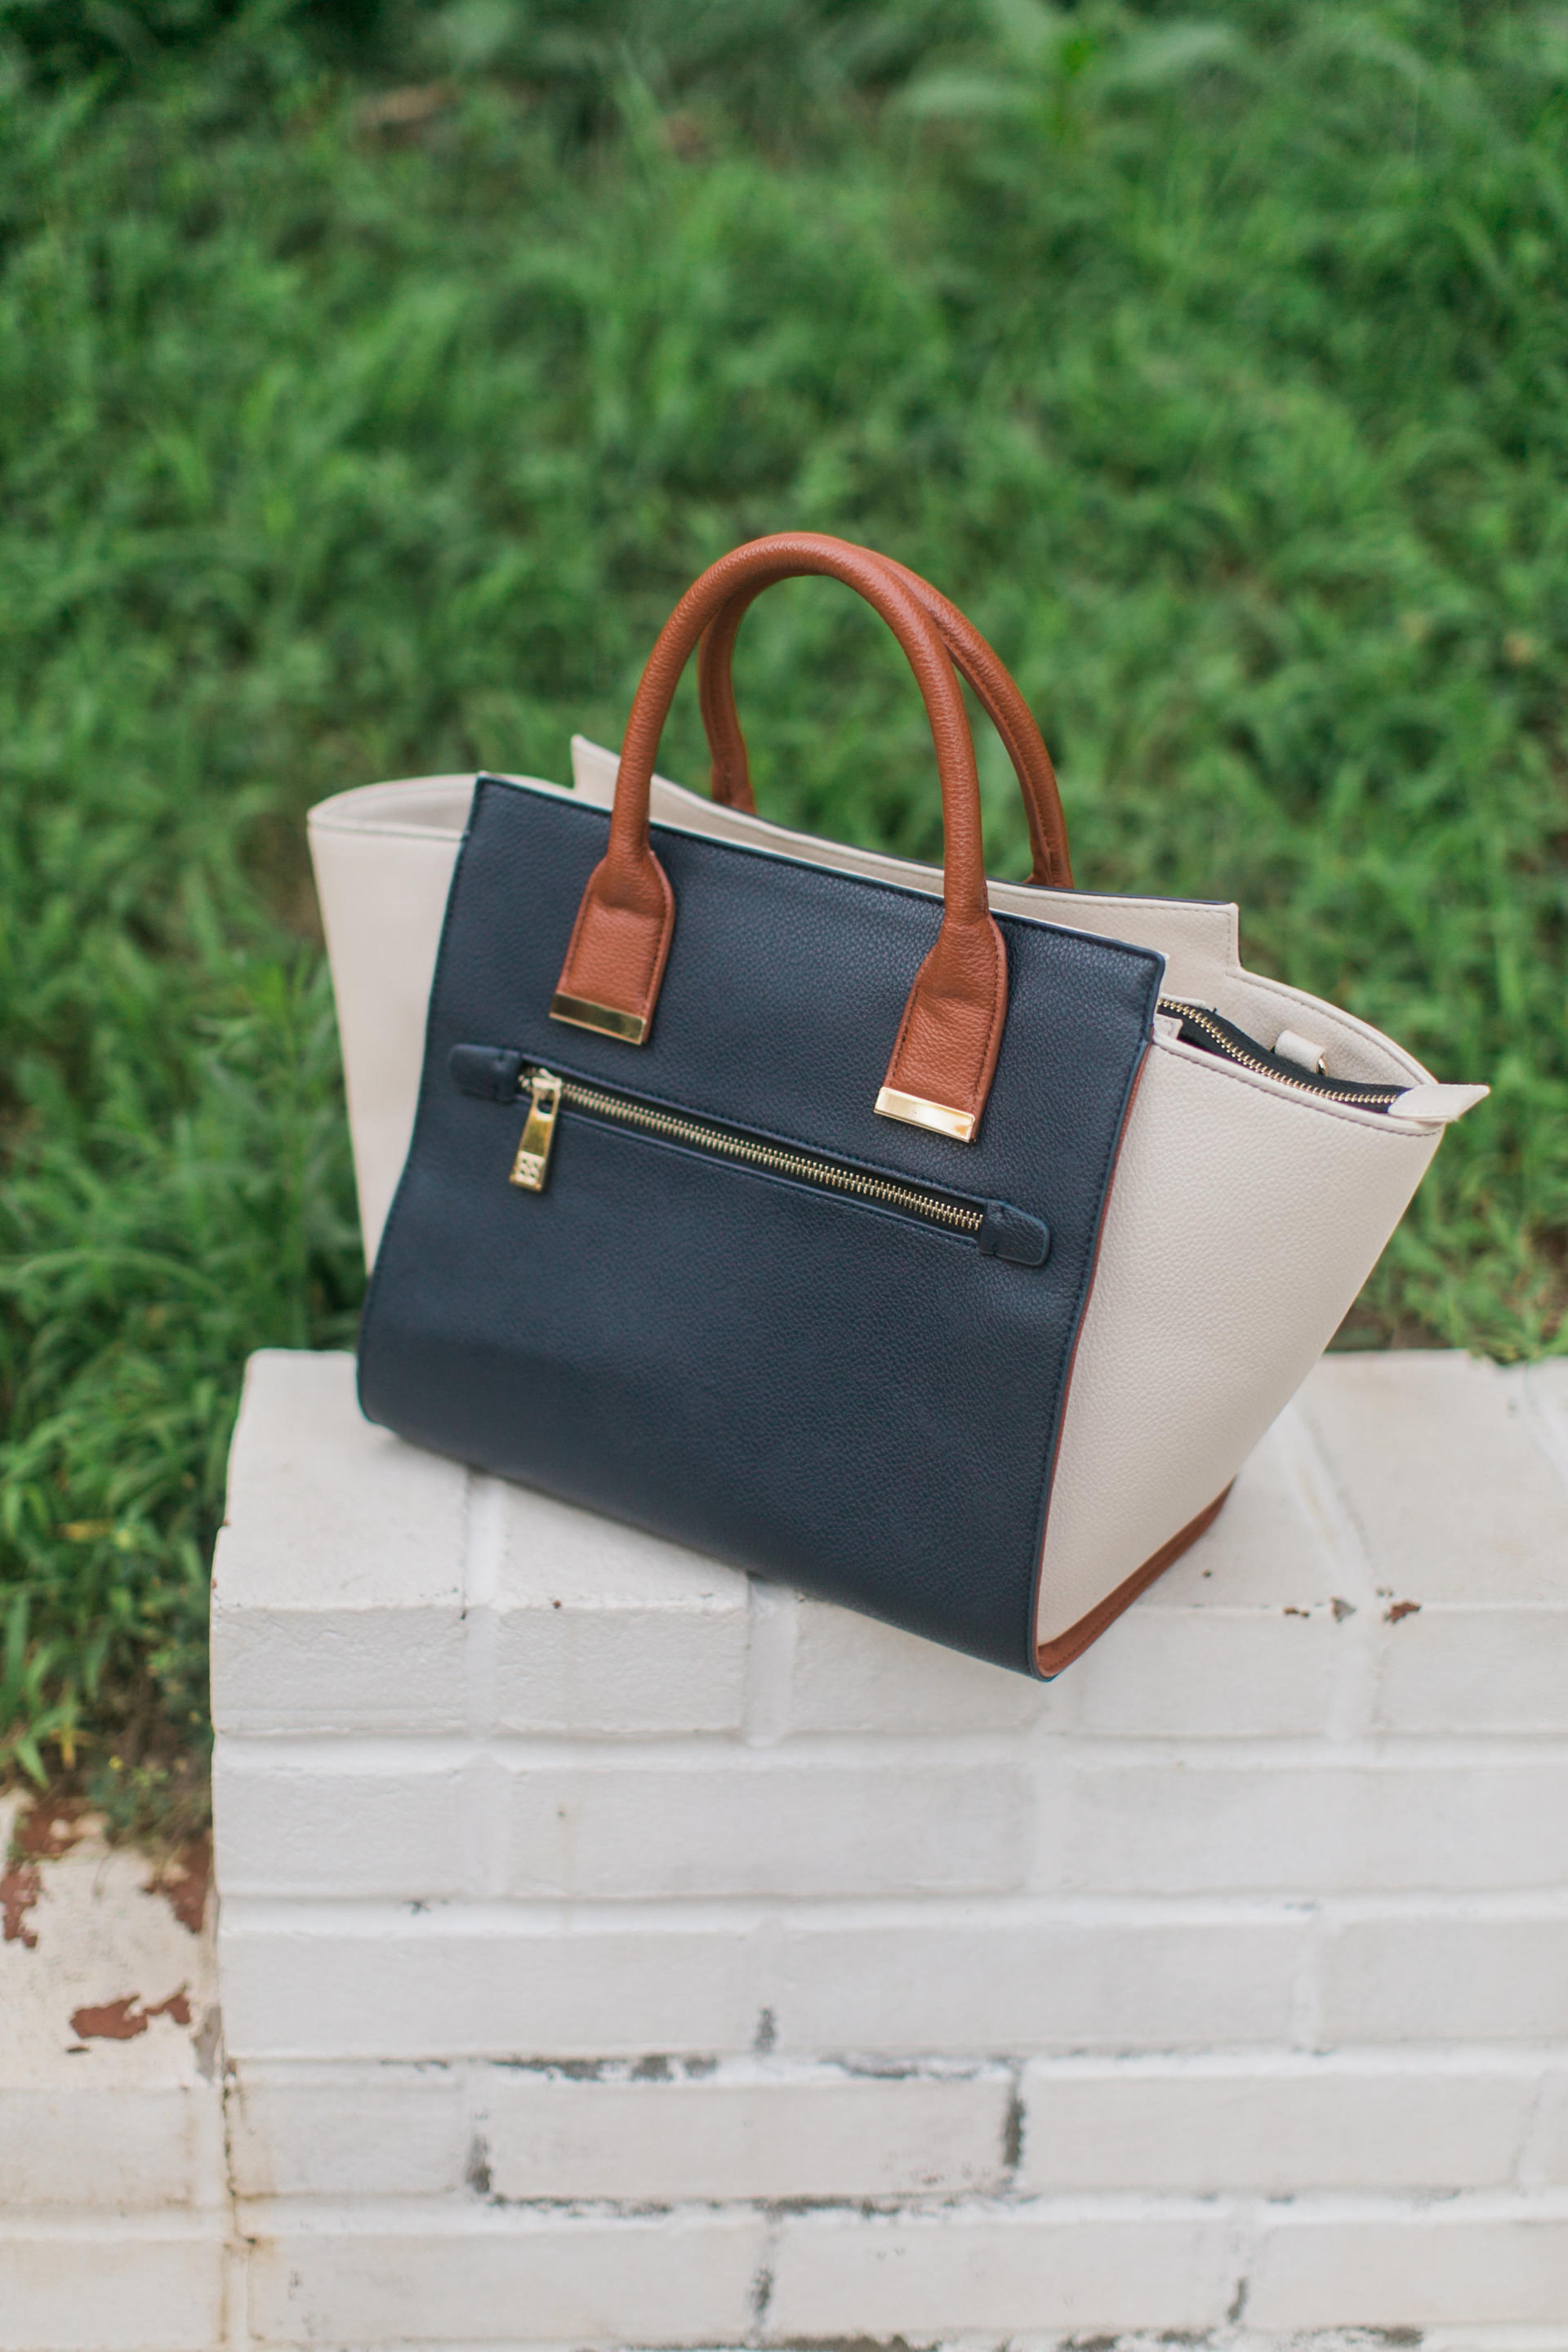 STYLE: Falling Into Reformation with 88 Handbags